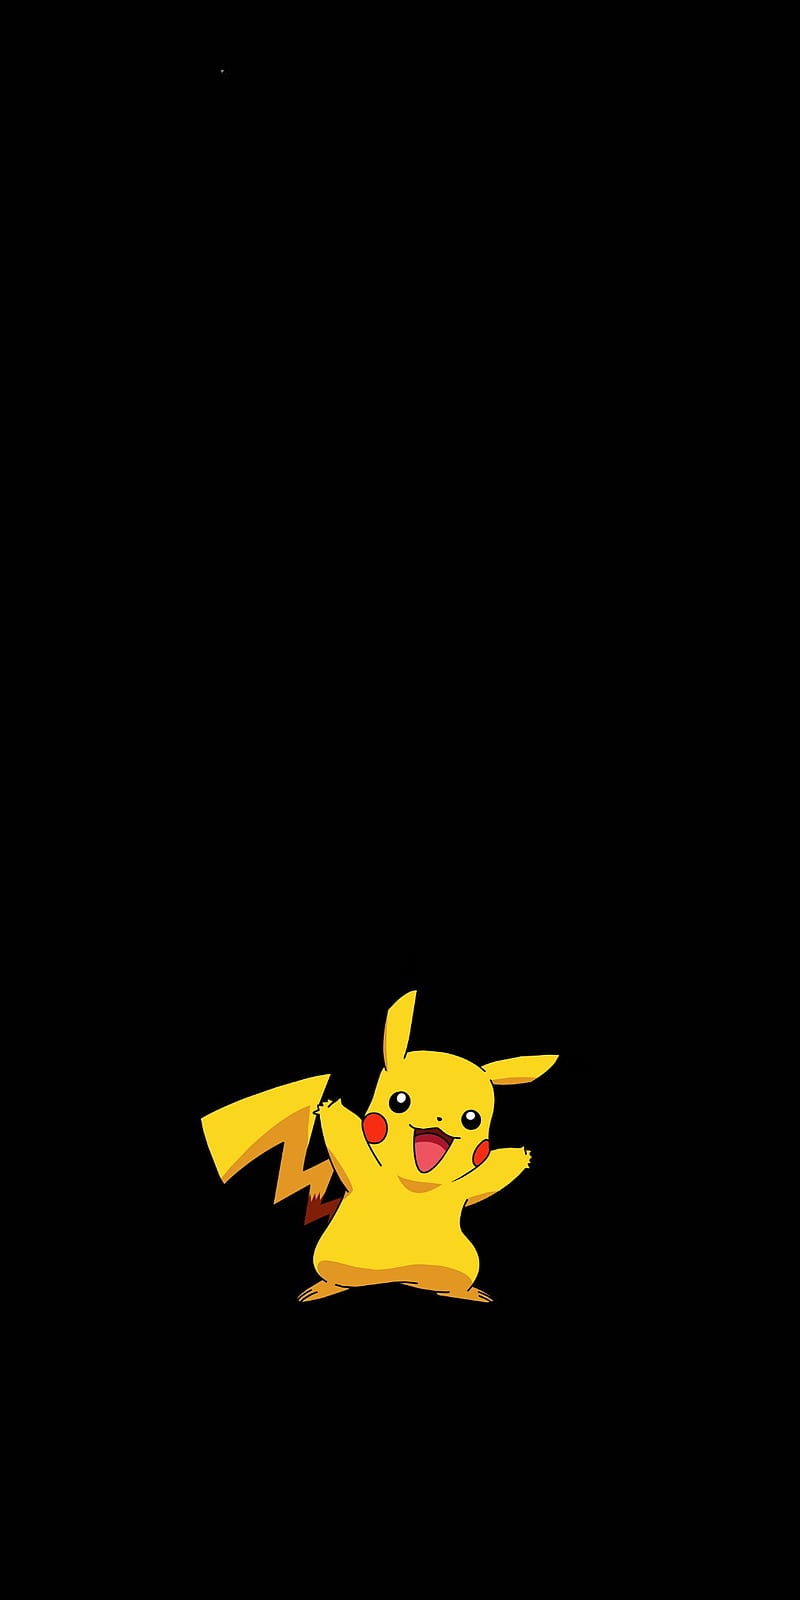 A yellow pokemon is standing on the ground - Pikachu